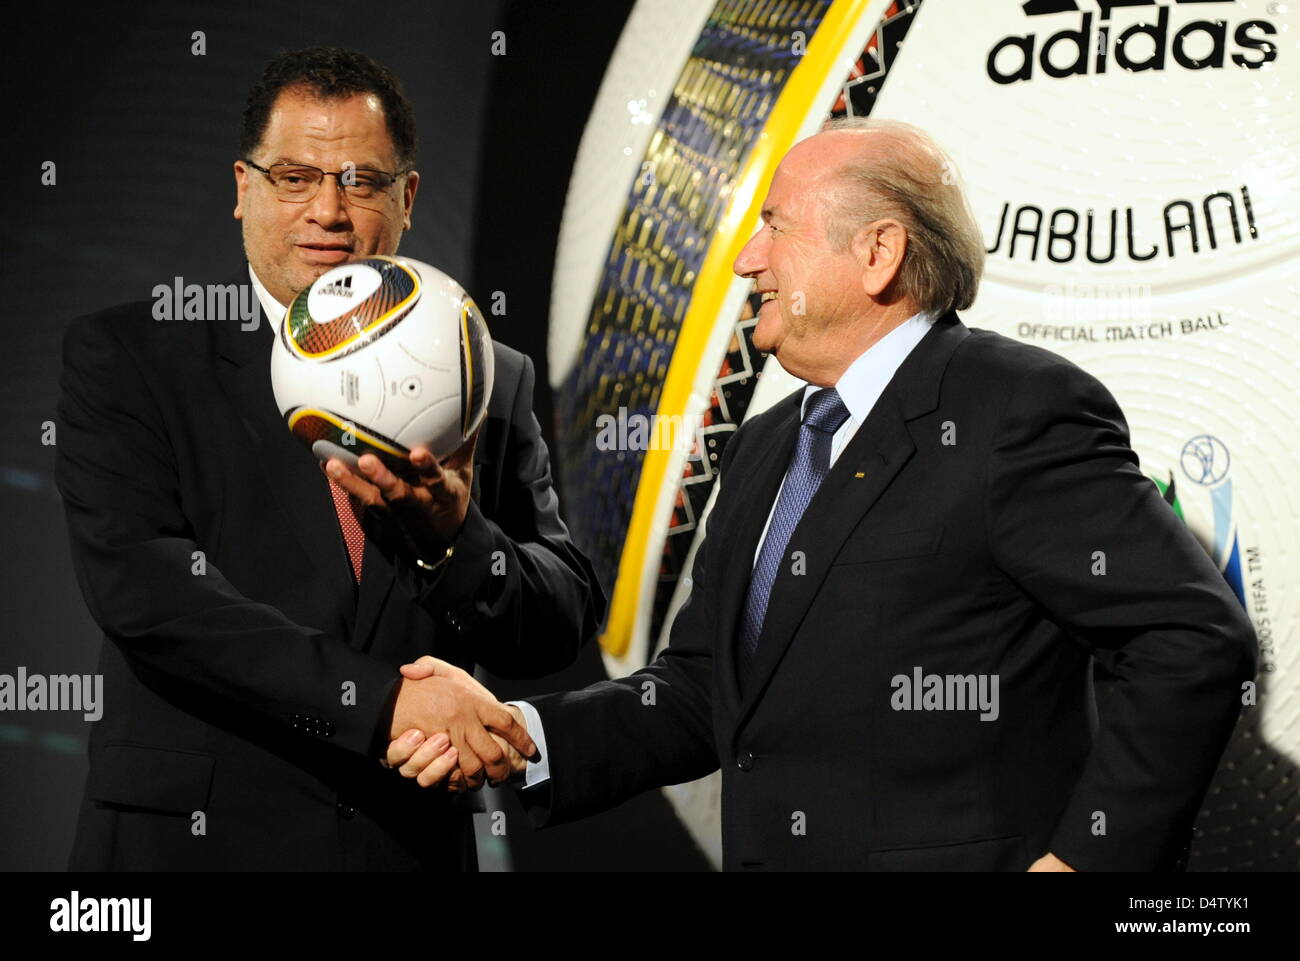 FIFA President Joseph Blatter (R) hands Jabulani, the official ball for the FIFA 2010 World Cup South Africa, to Danny Jordaan (L), managing director of the organisation committee, in Cape Town, South Africa, 04 December 2009. Jabulani is produced by German company adidas. Photo: BERND WEISSBROD Stock Photo